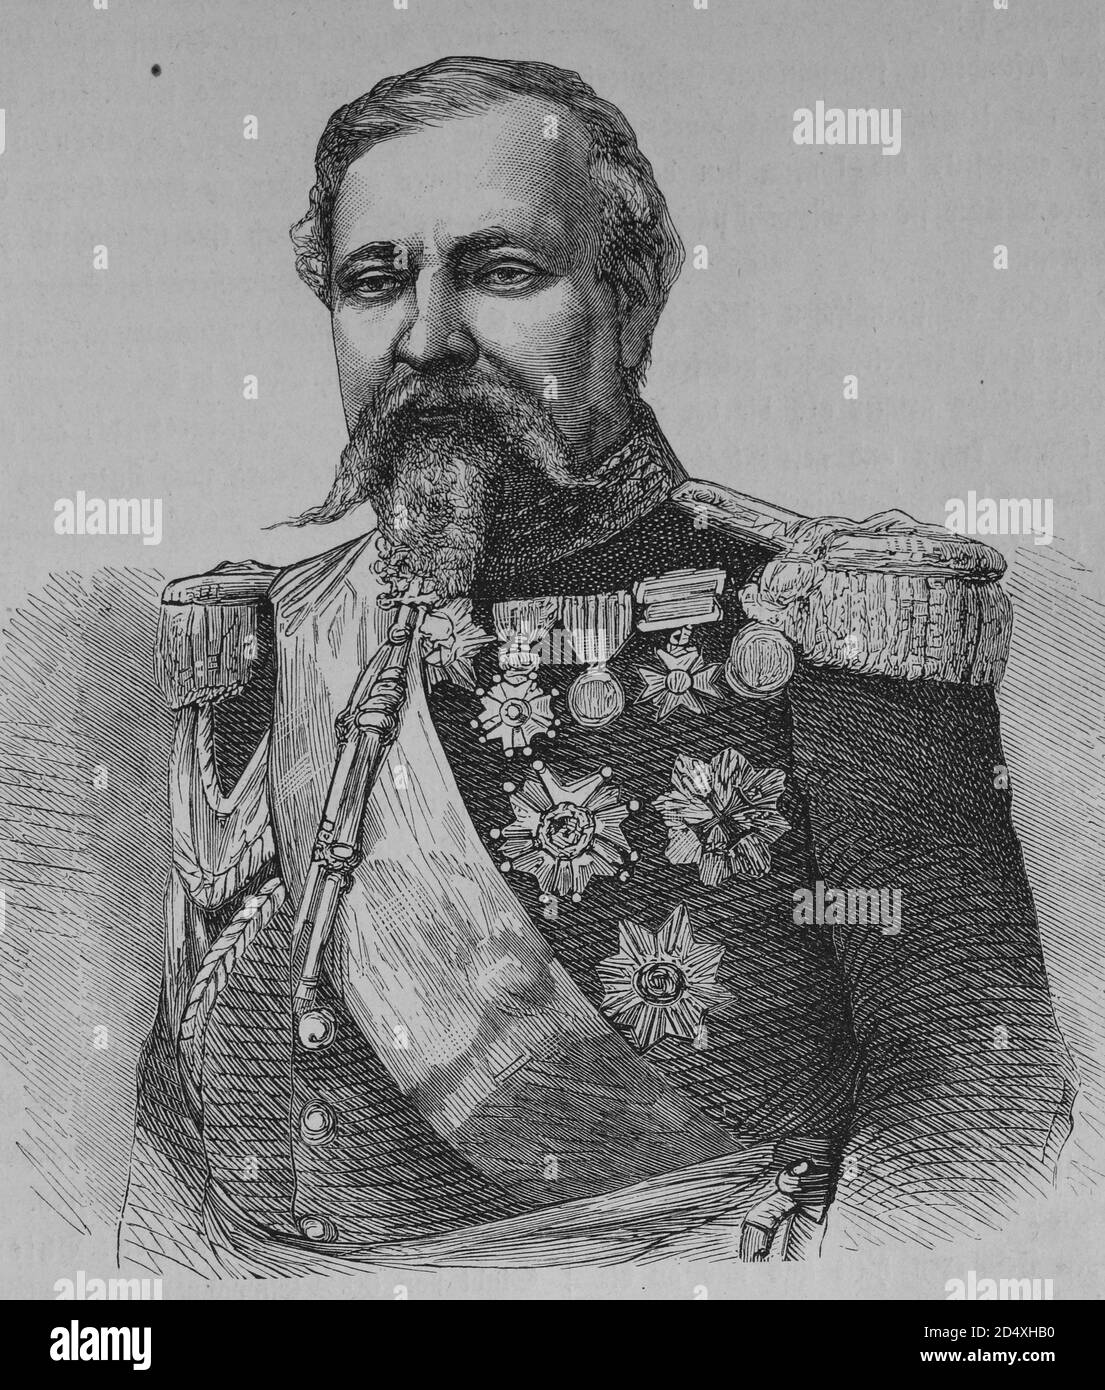 Edmond Leboeuf, 1809-1888, Marschall of France and minister of war, illustrated war history, German - French war 1870-1871 Stock Photo